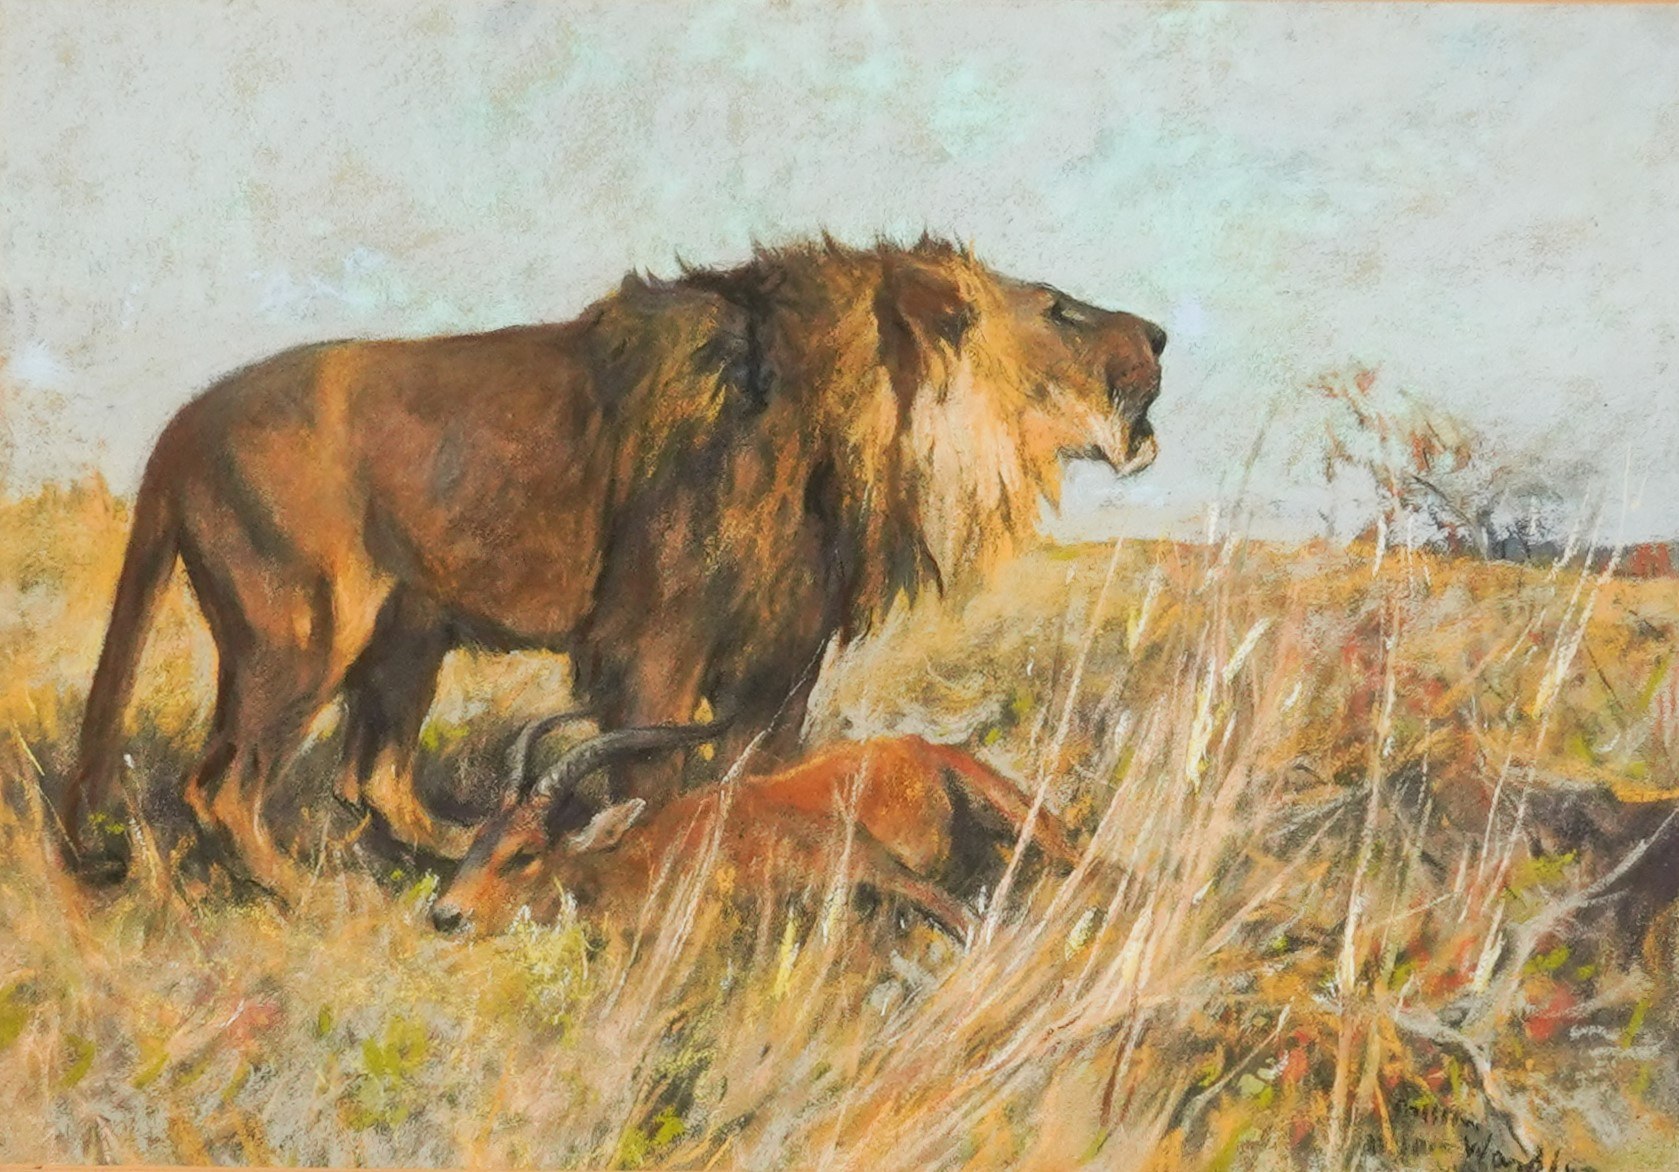 Lion and antelope signed 'Arthur Wardle' (lower right), titled on the artist's label attached ti the backboard pastel on paper 25 x 36.5cm £500-800